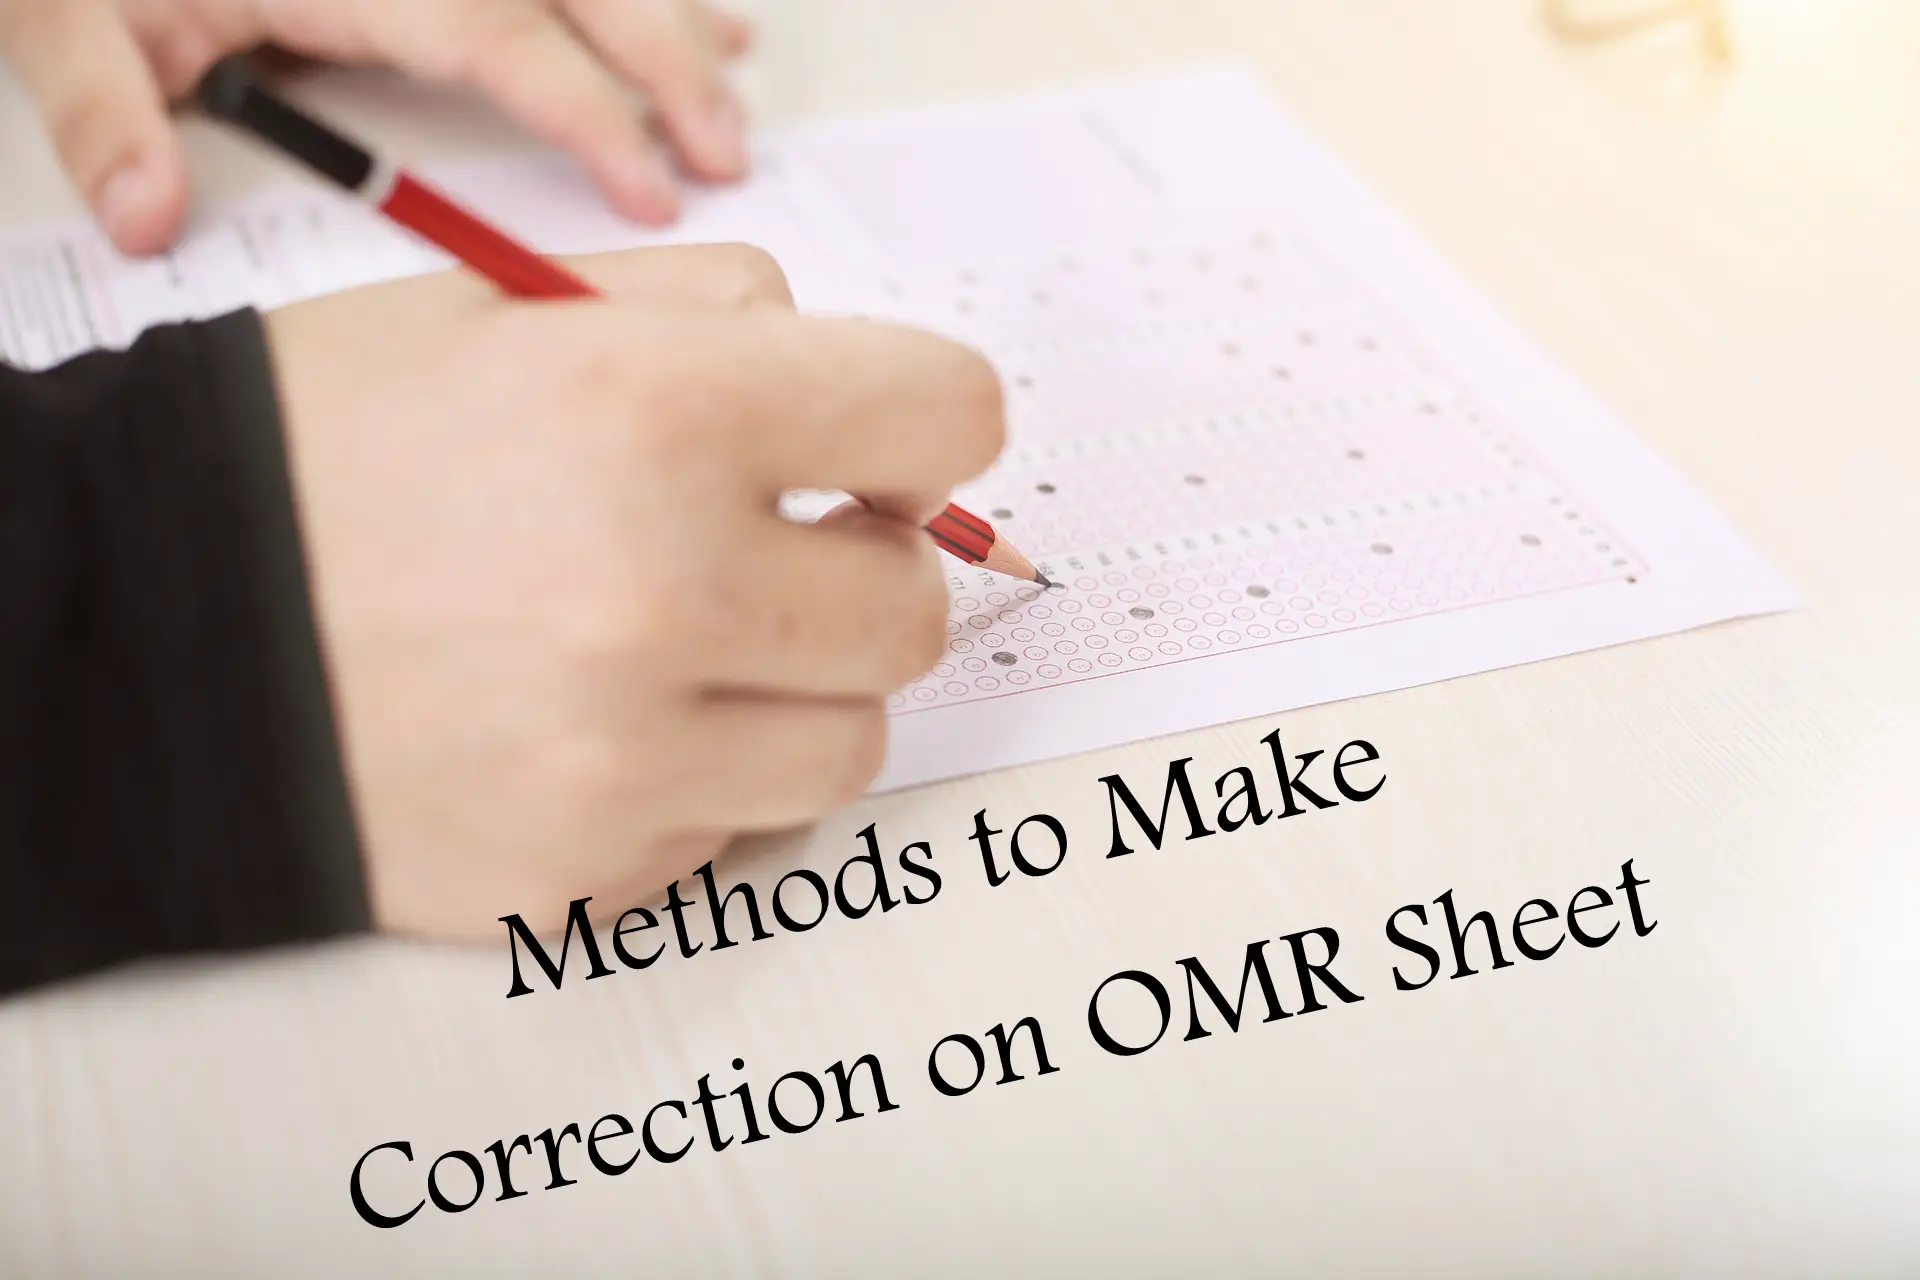 How to Make Correction in OMR sheet